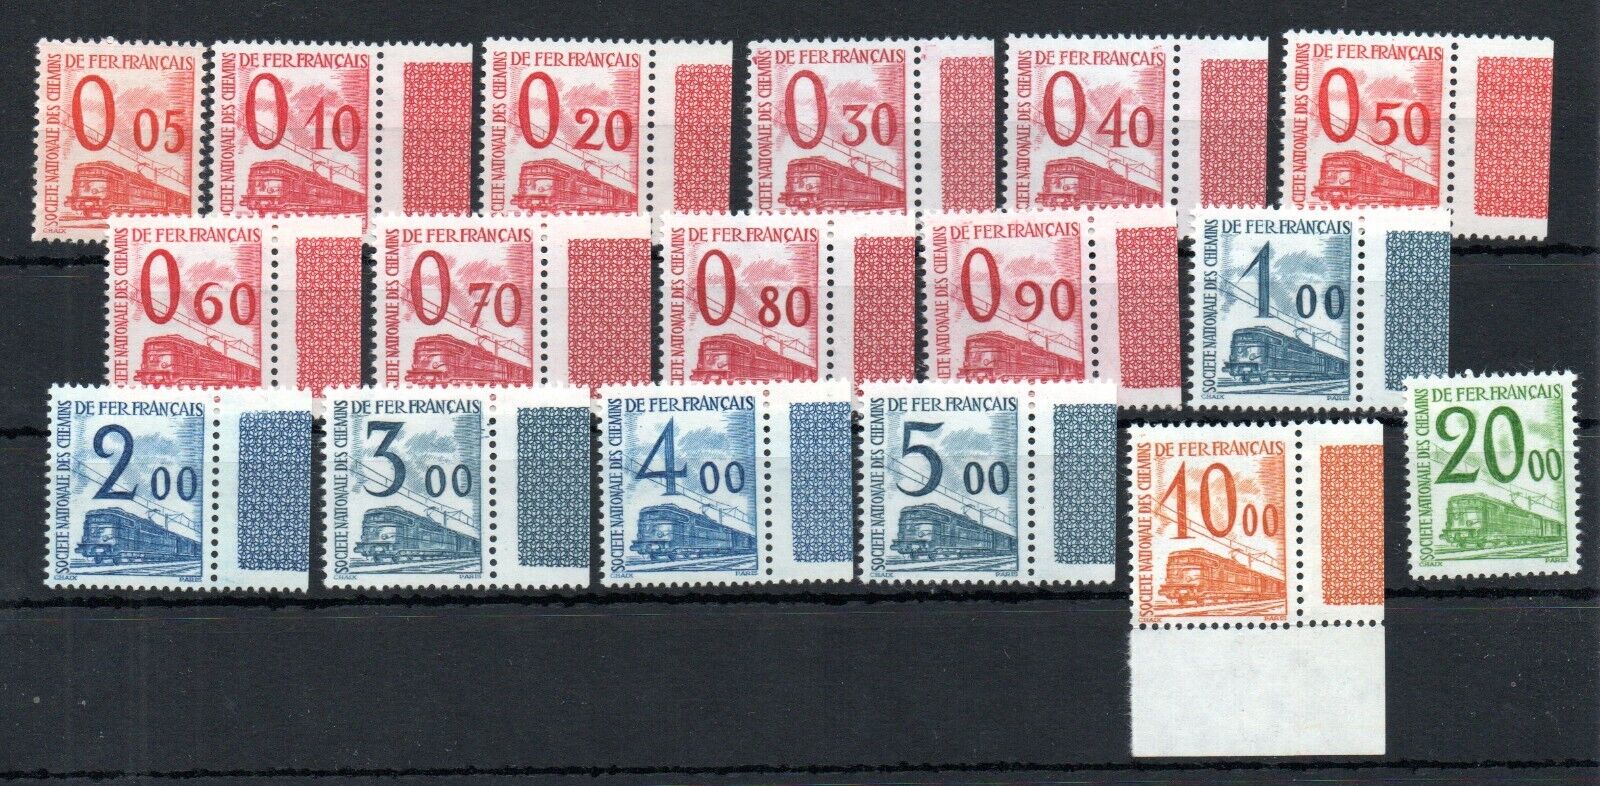 FRANCE  1960  very scarce full set RAILWAY STAMPS up tp 20 FR  MNH 